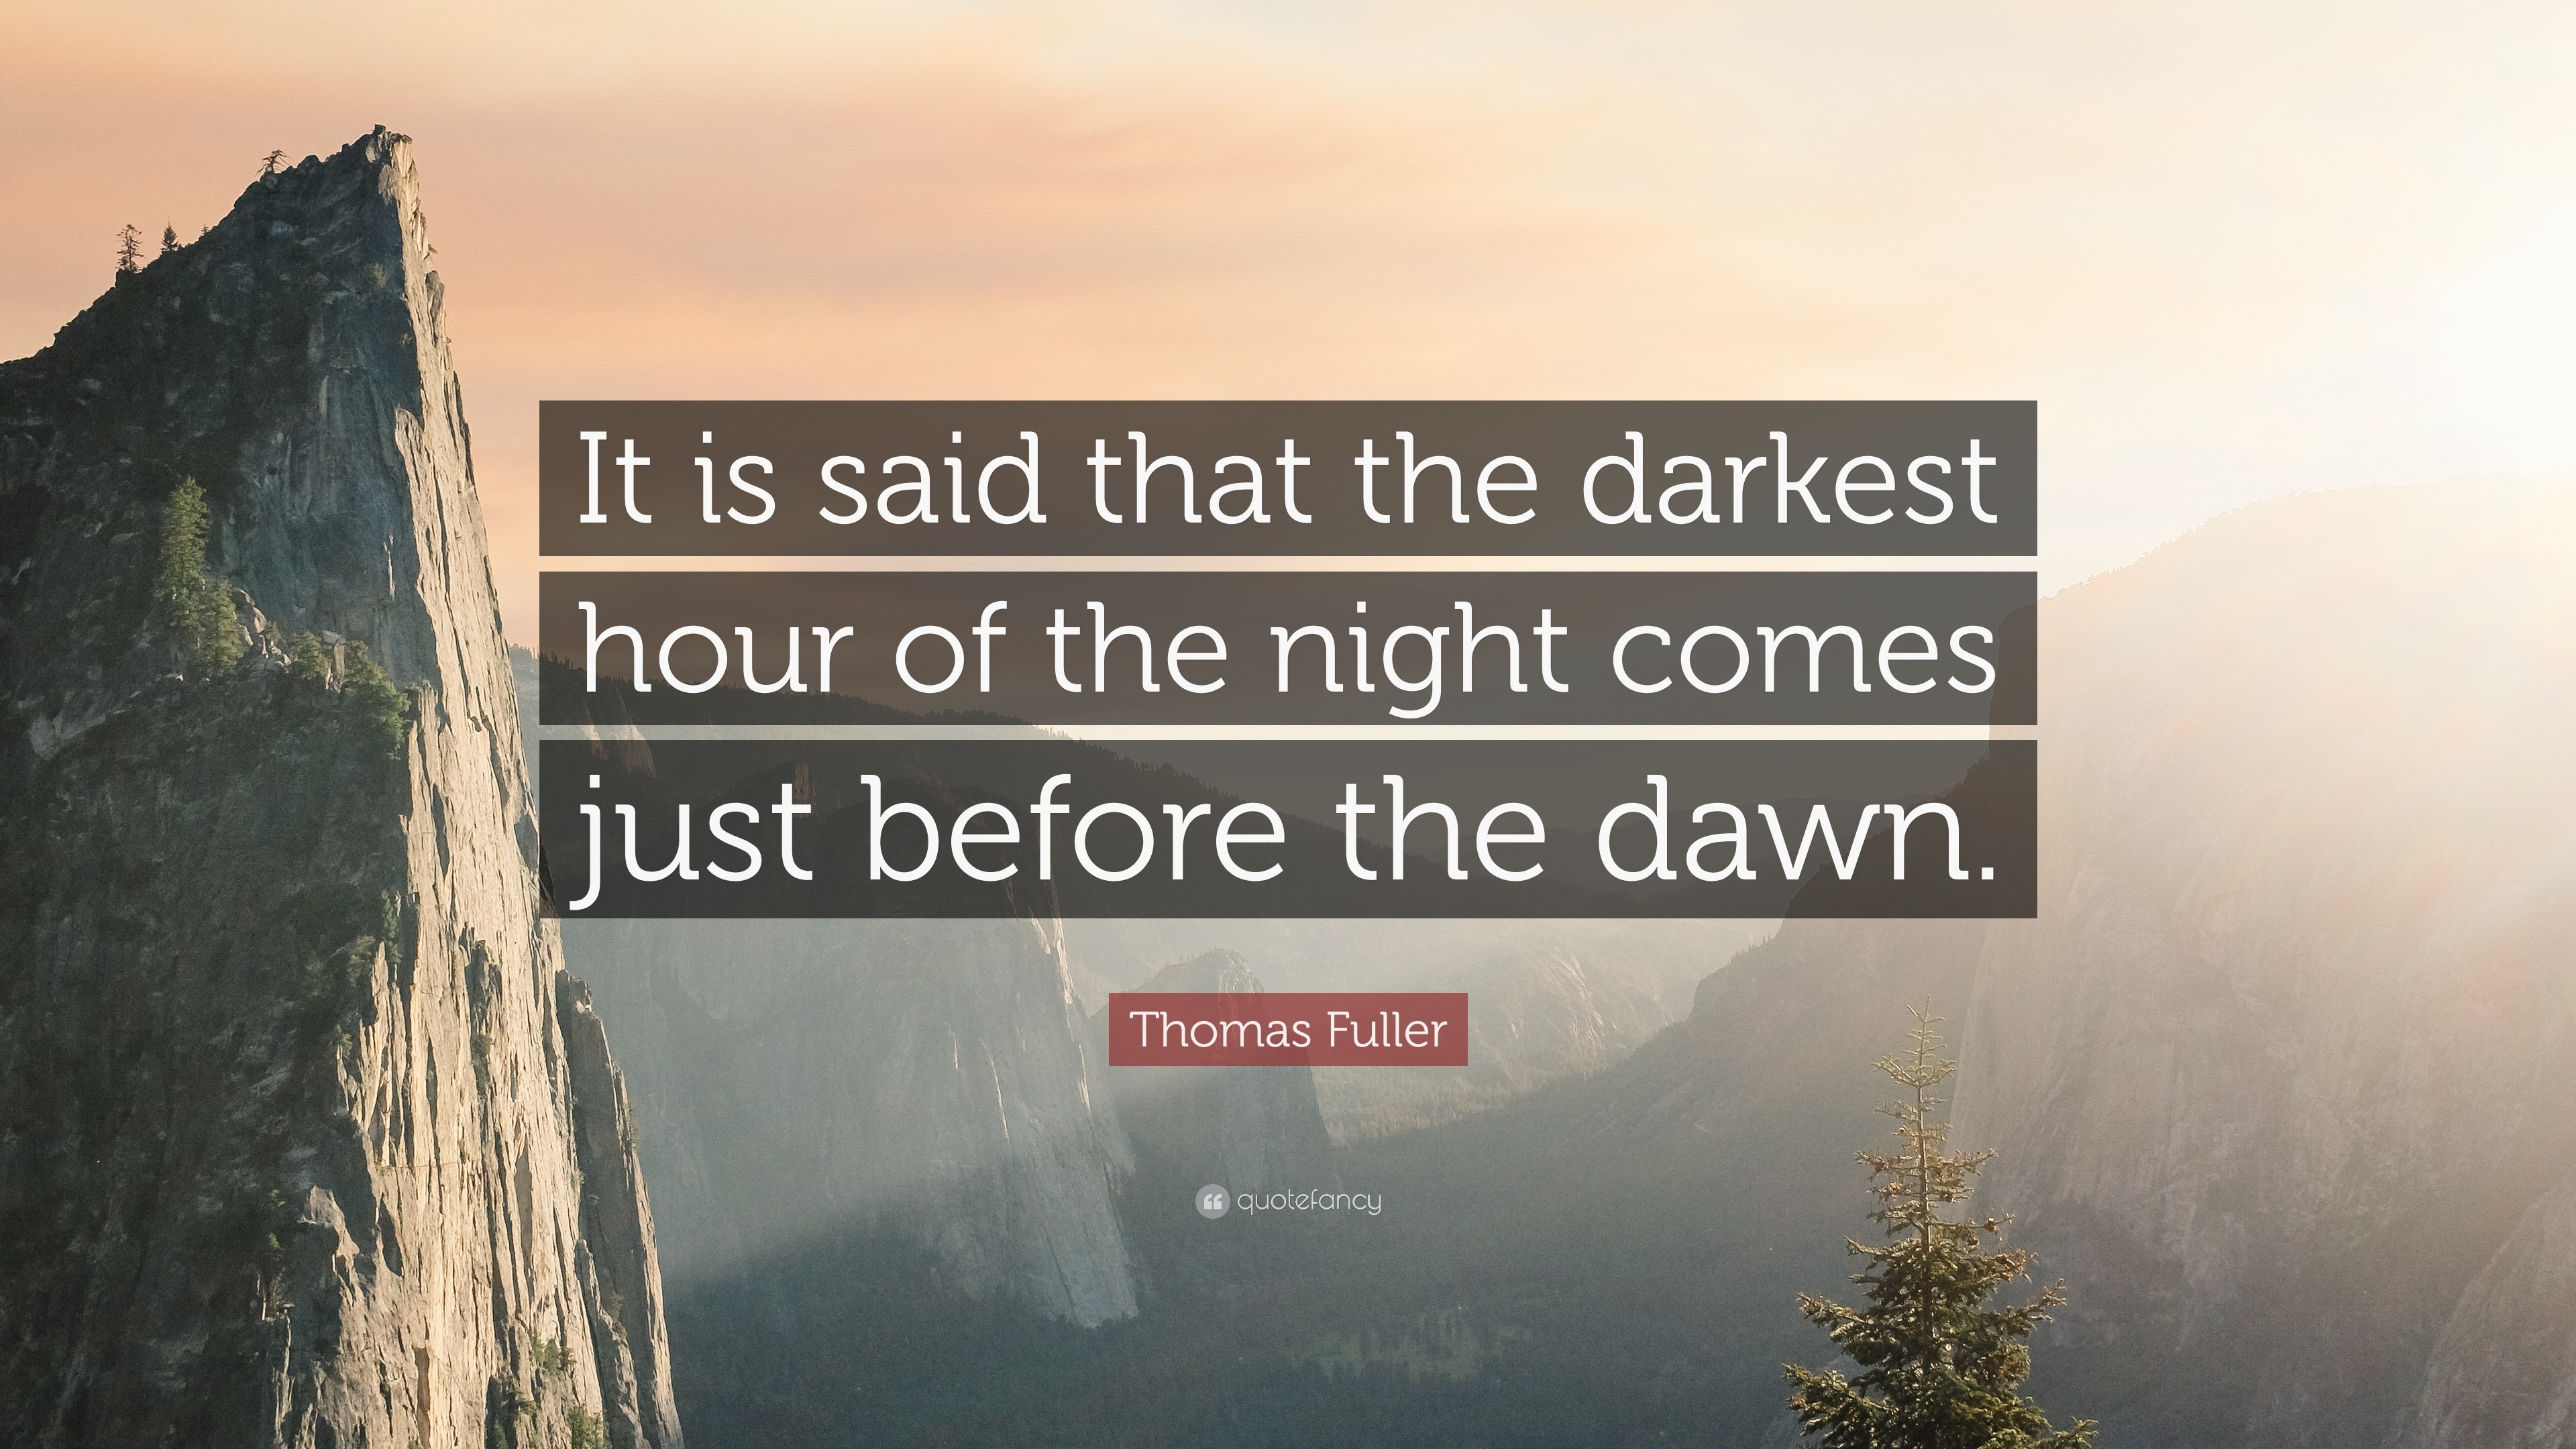 Thomas Fuller Quote: "It is said that the darkest hour of the night comes just before the dawn ...